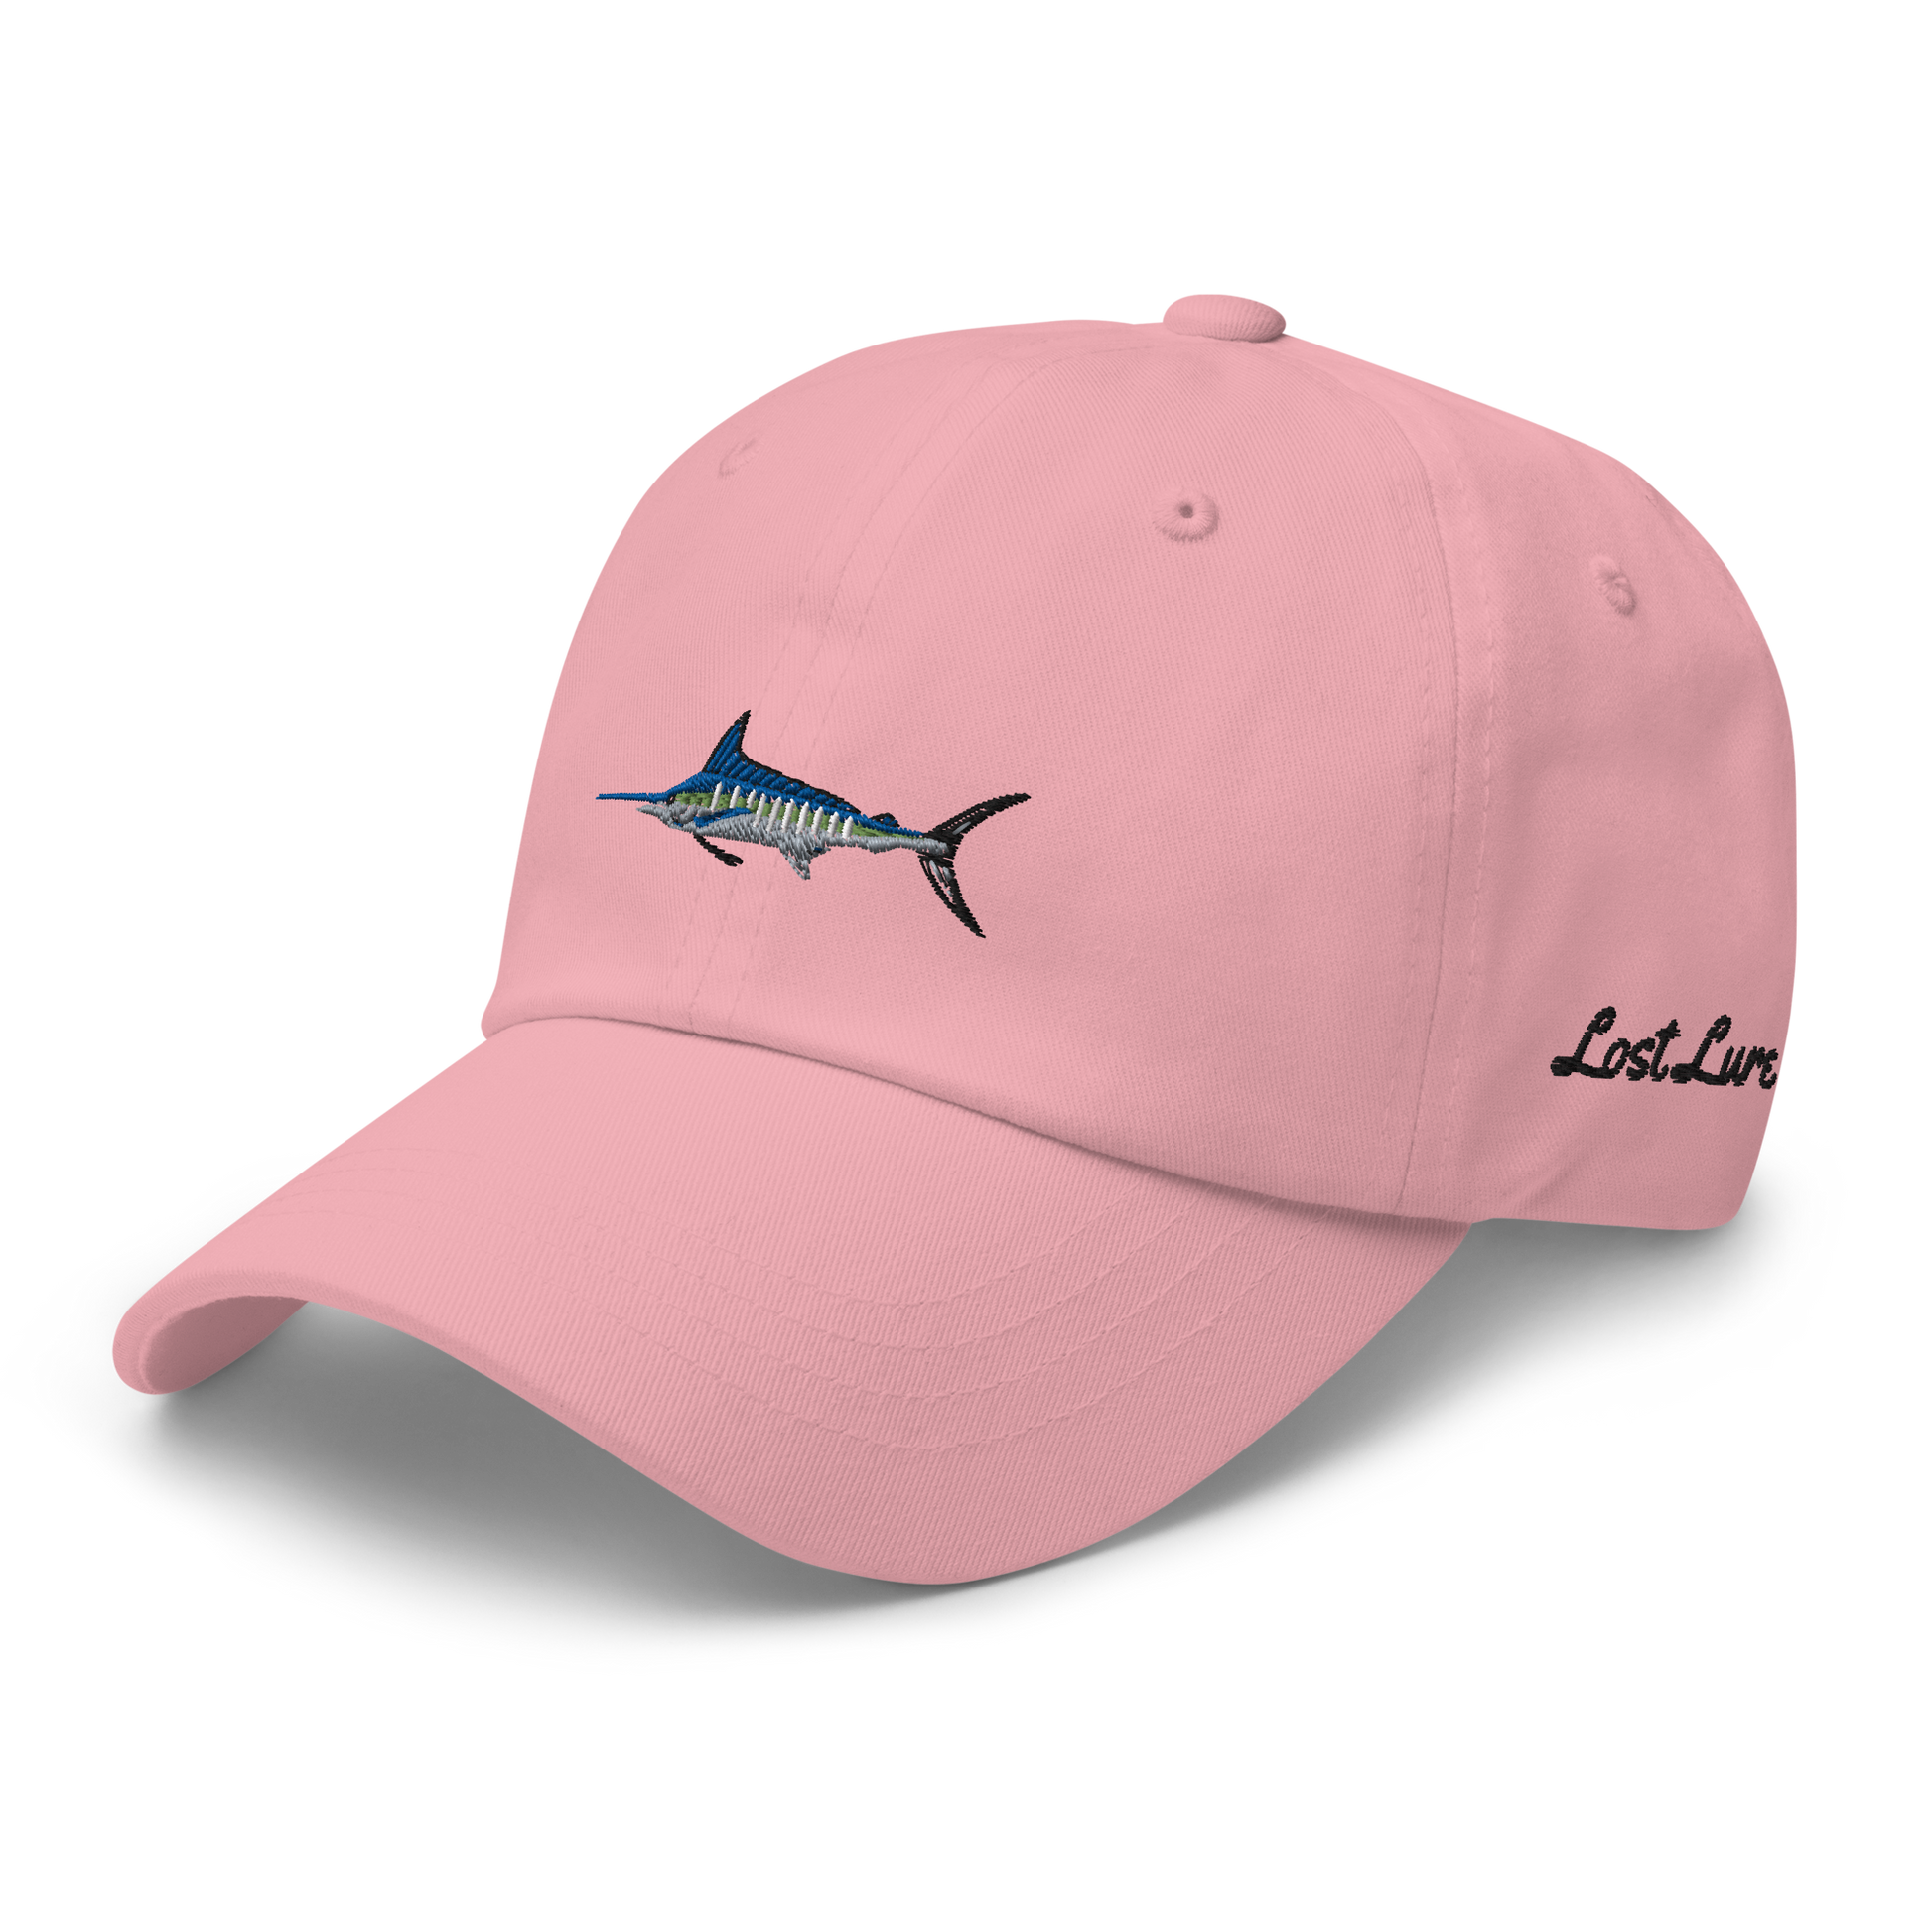 Pink colored Marlin fishing fishing hat. Simple fishing hat/ dad hat with embroidered striped Marlin on the front and lost lure embroidered on the left side and back